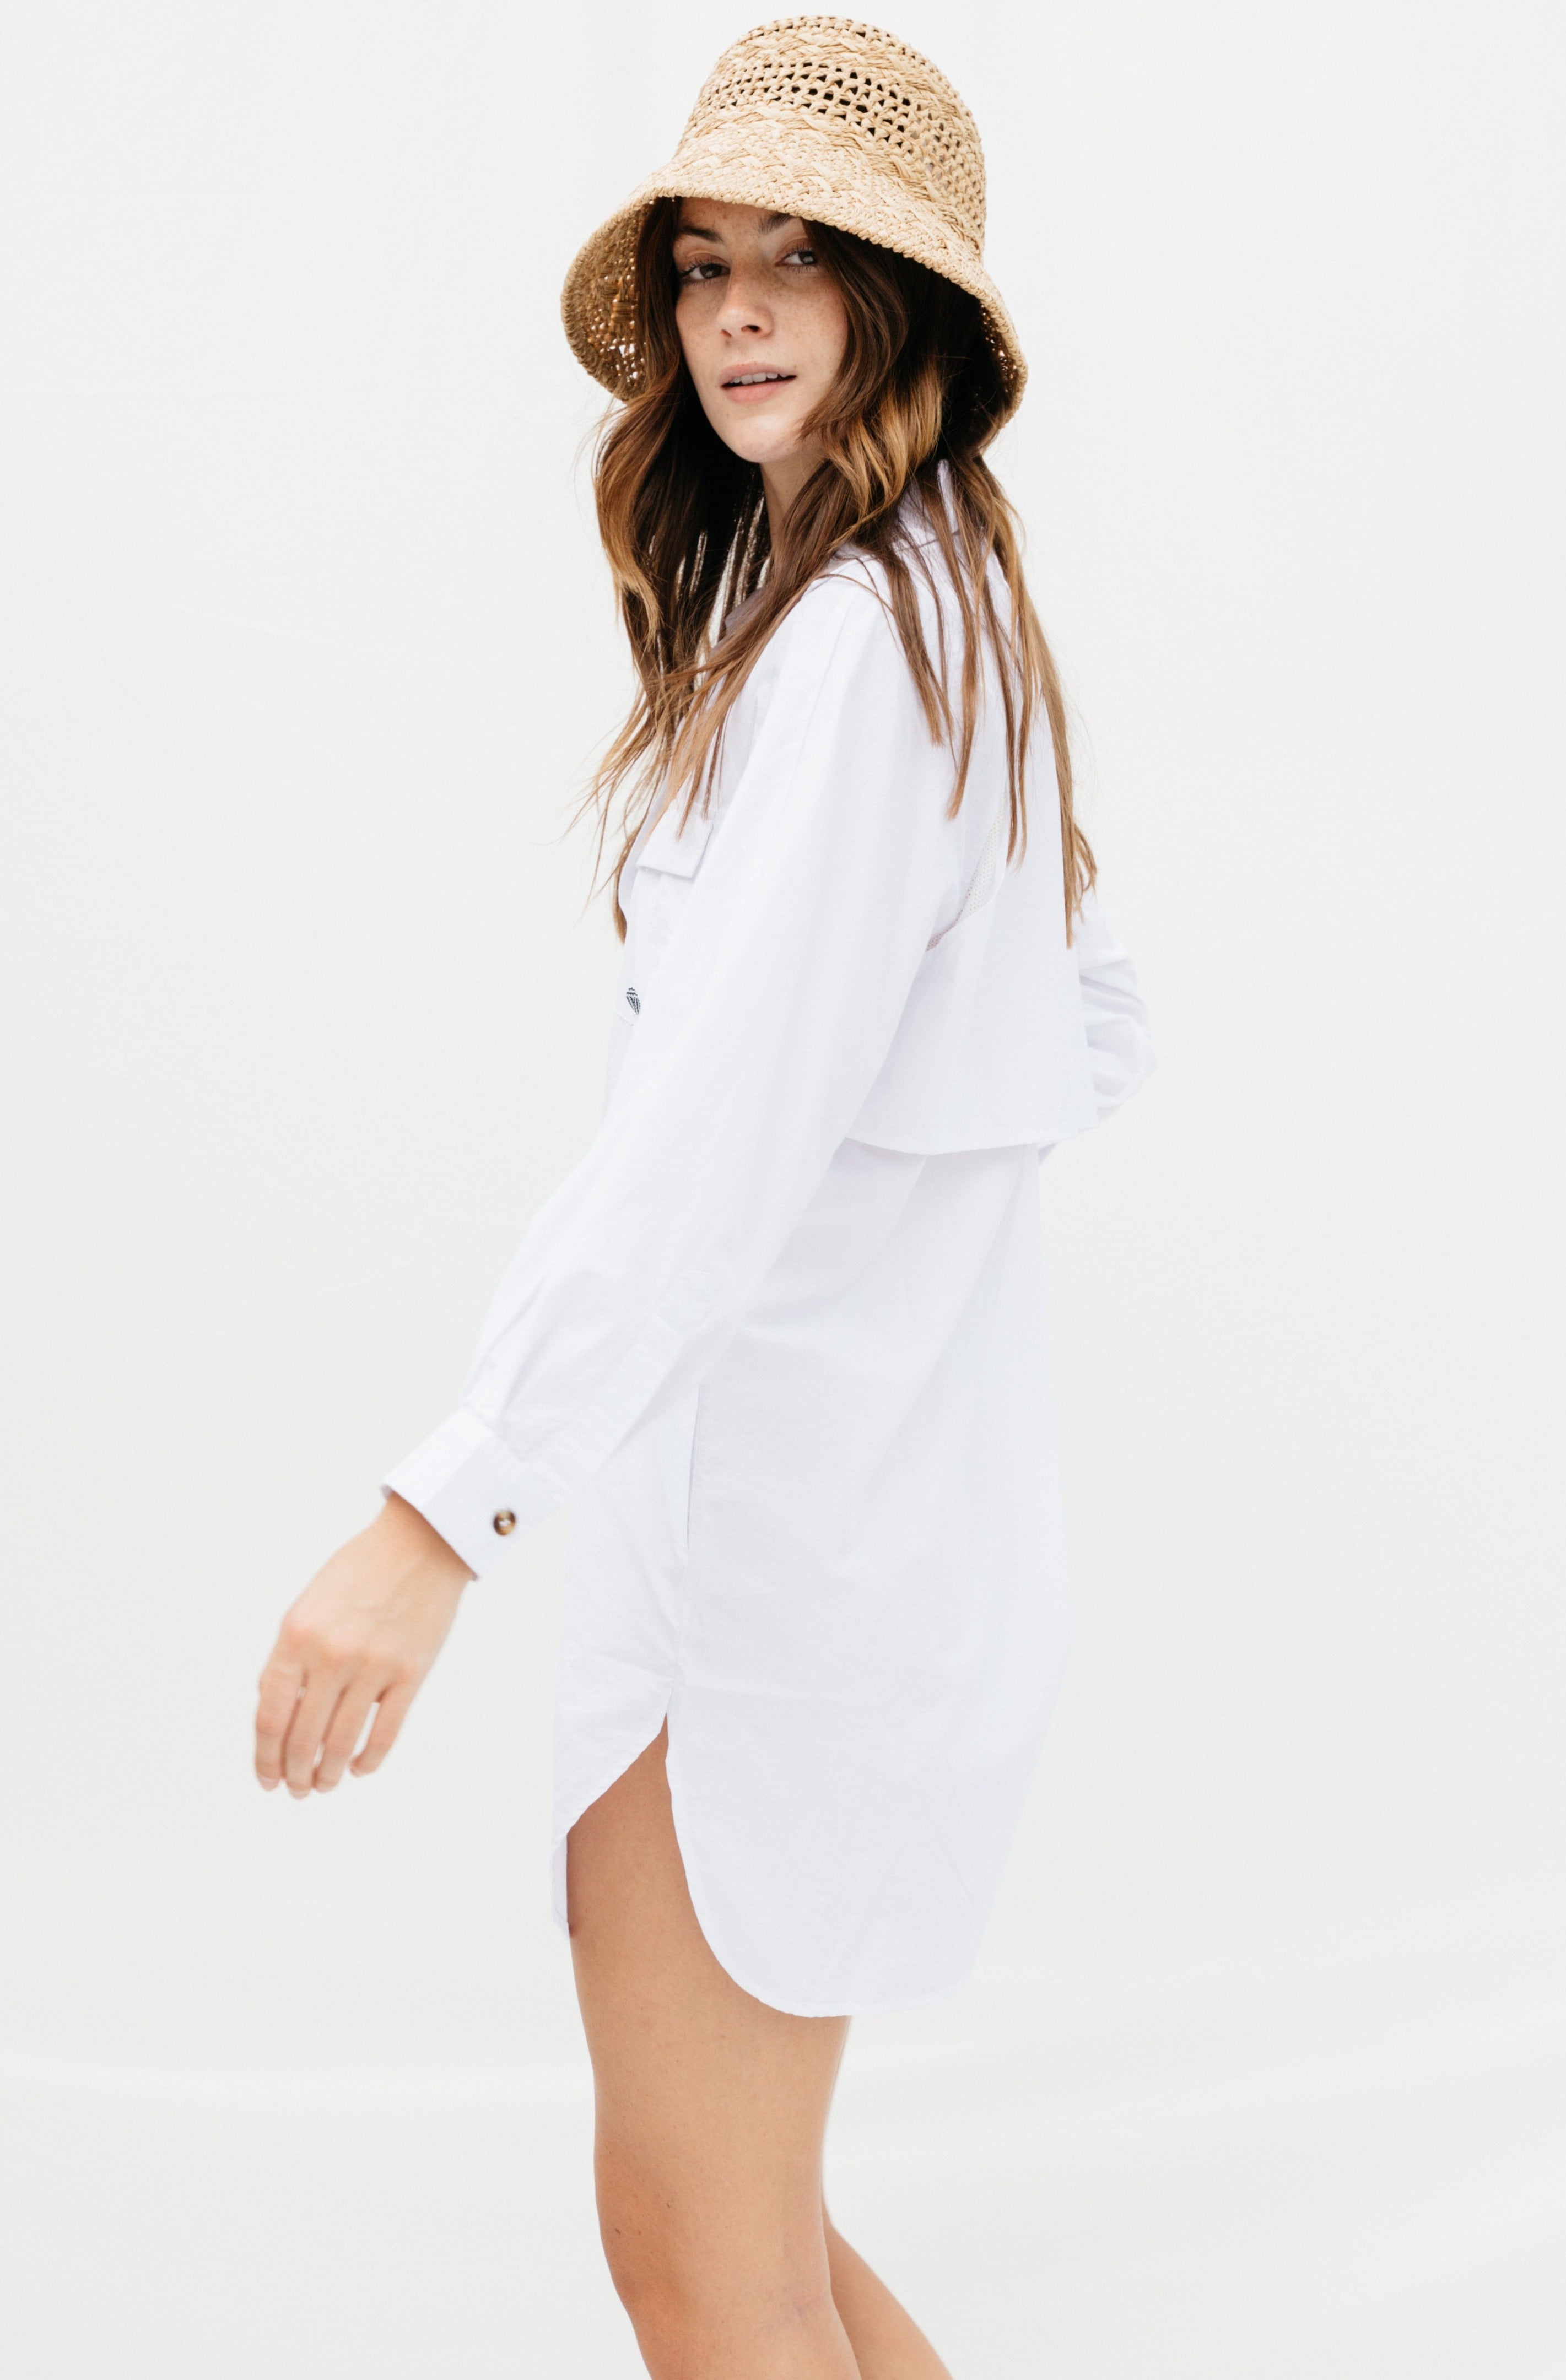 Women's Fishing Shirtdress Cover-Up in White by Lady Captain Extra Large / White